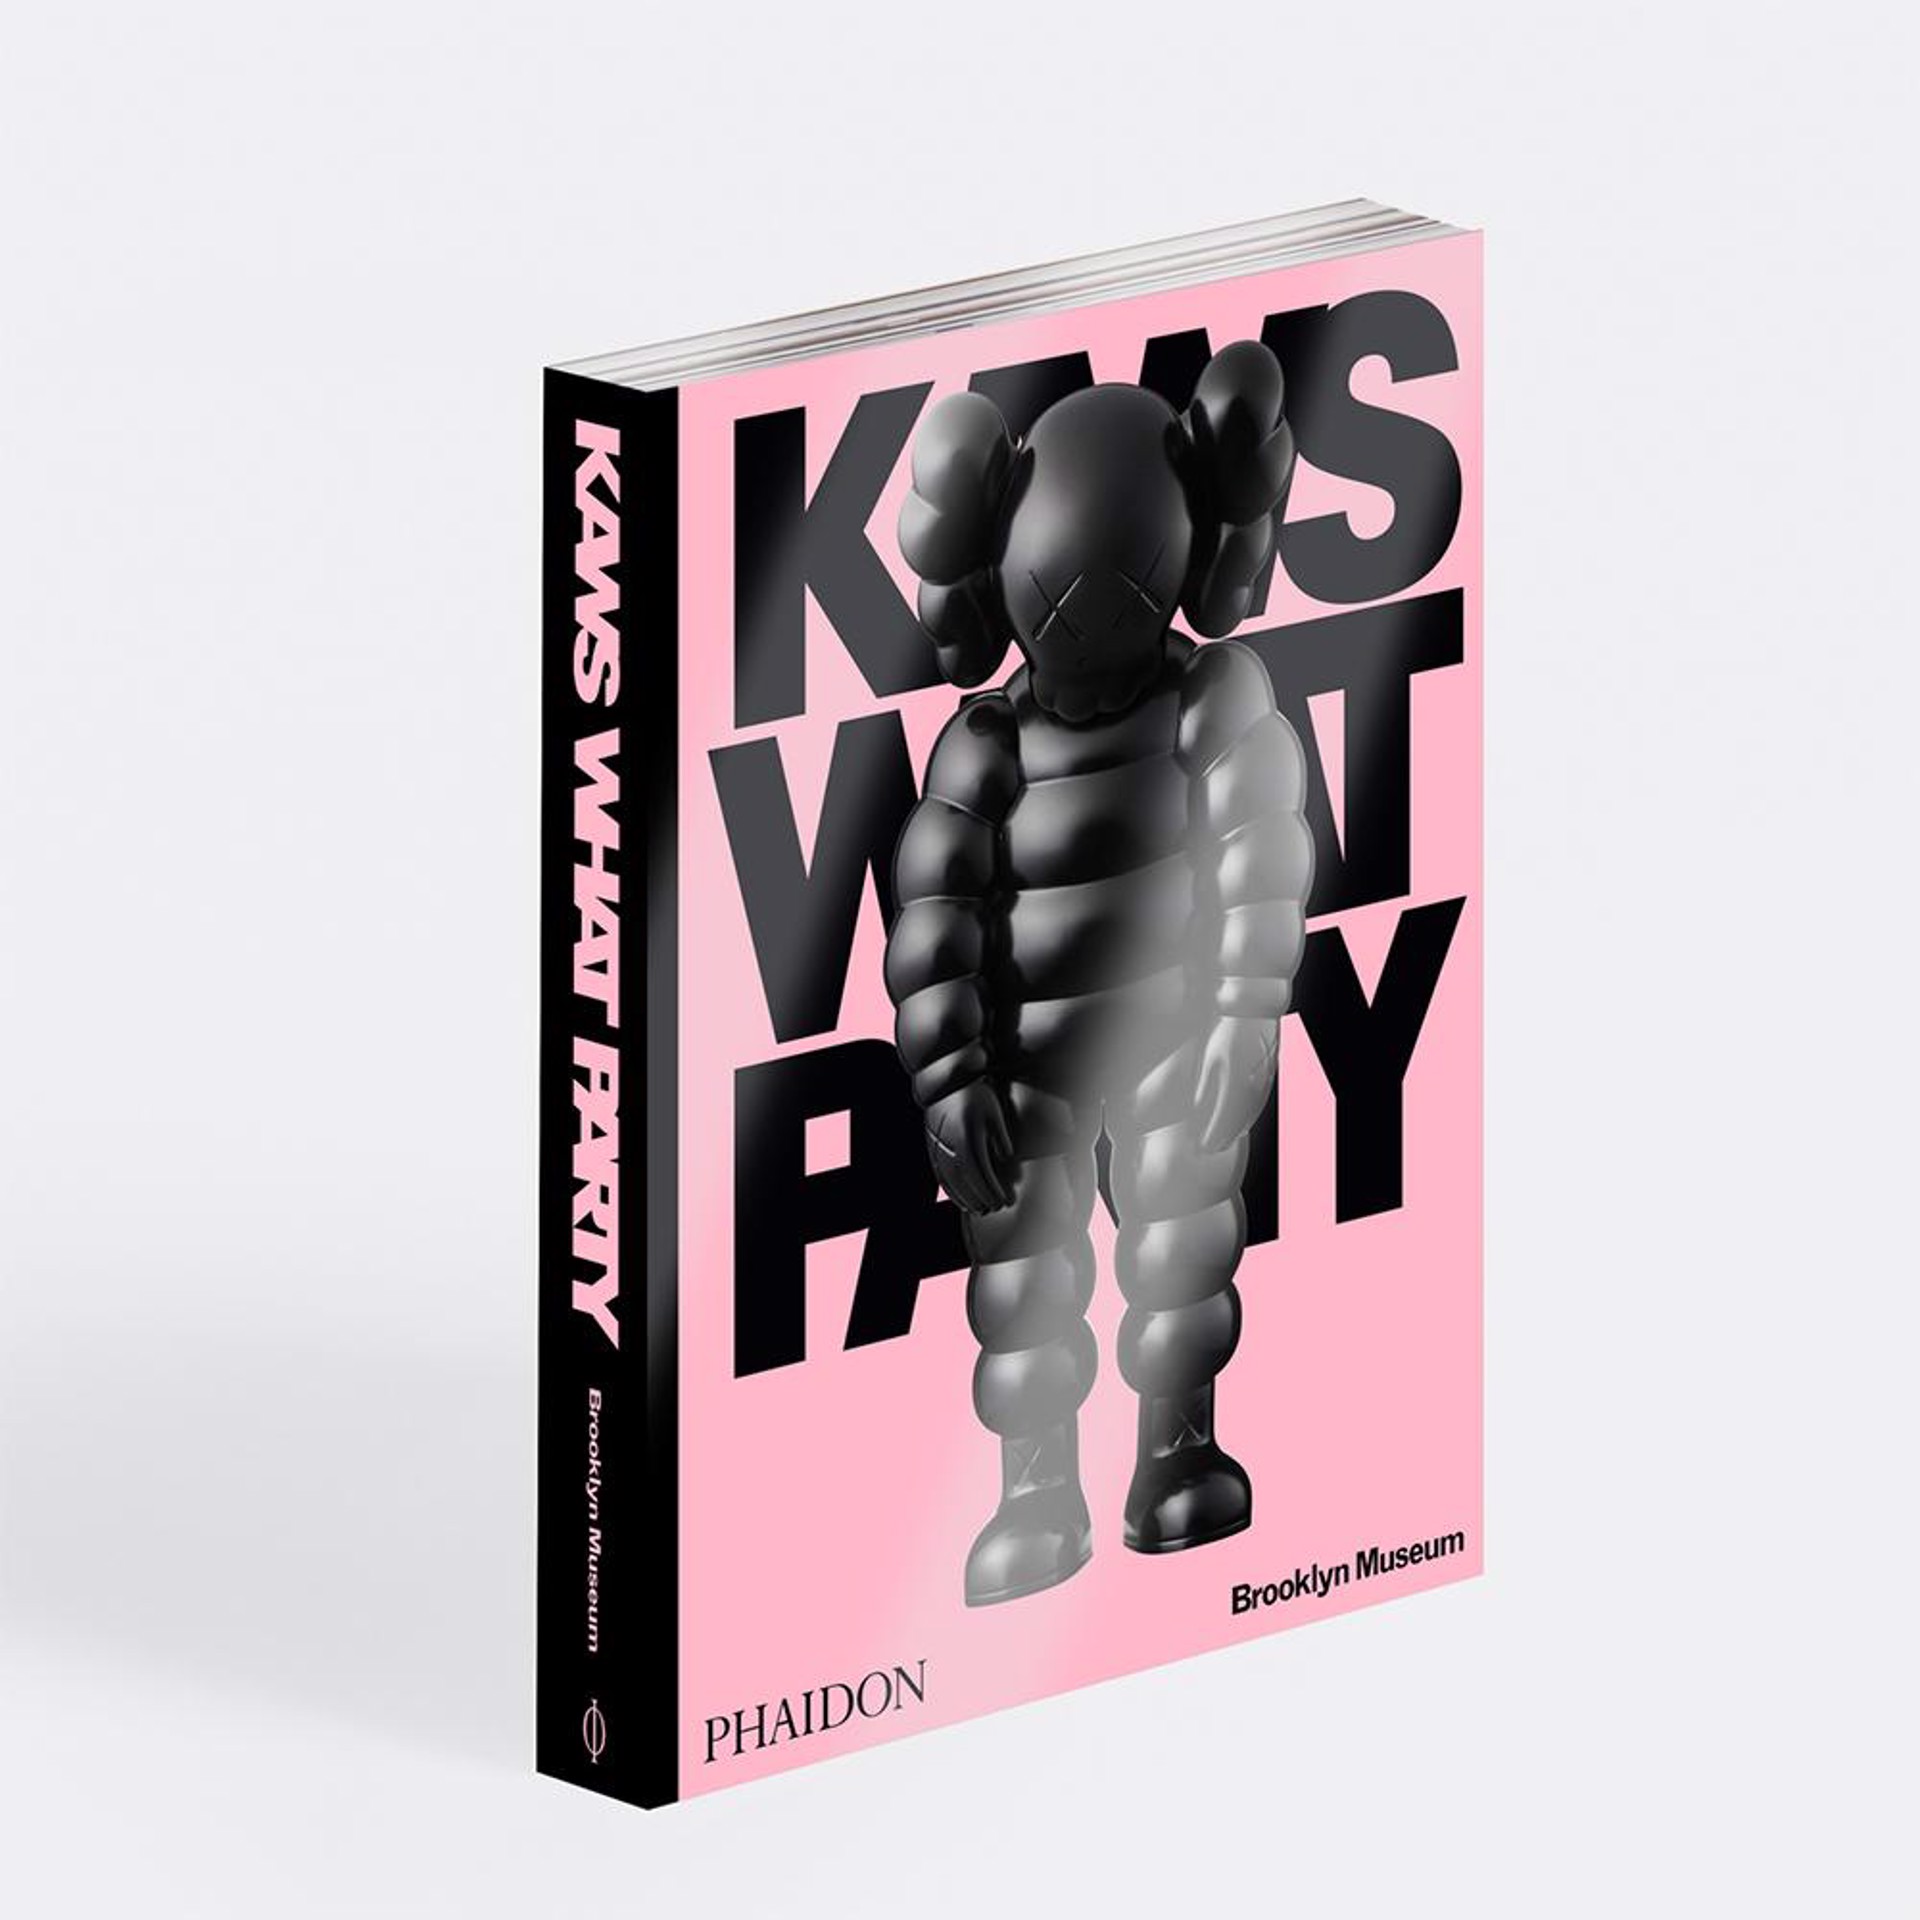 KAWS: WHAT PARTY (Black on Pink edition) by KAWS